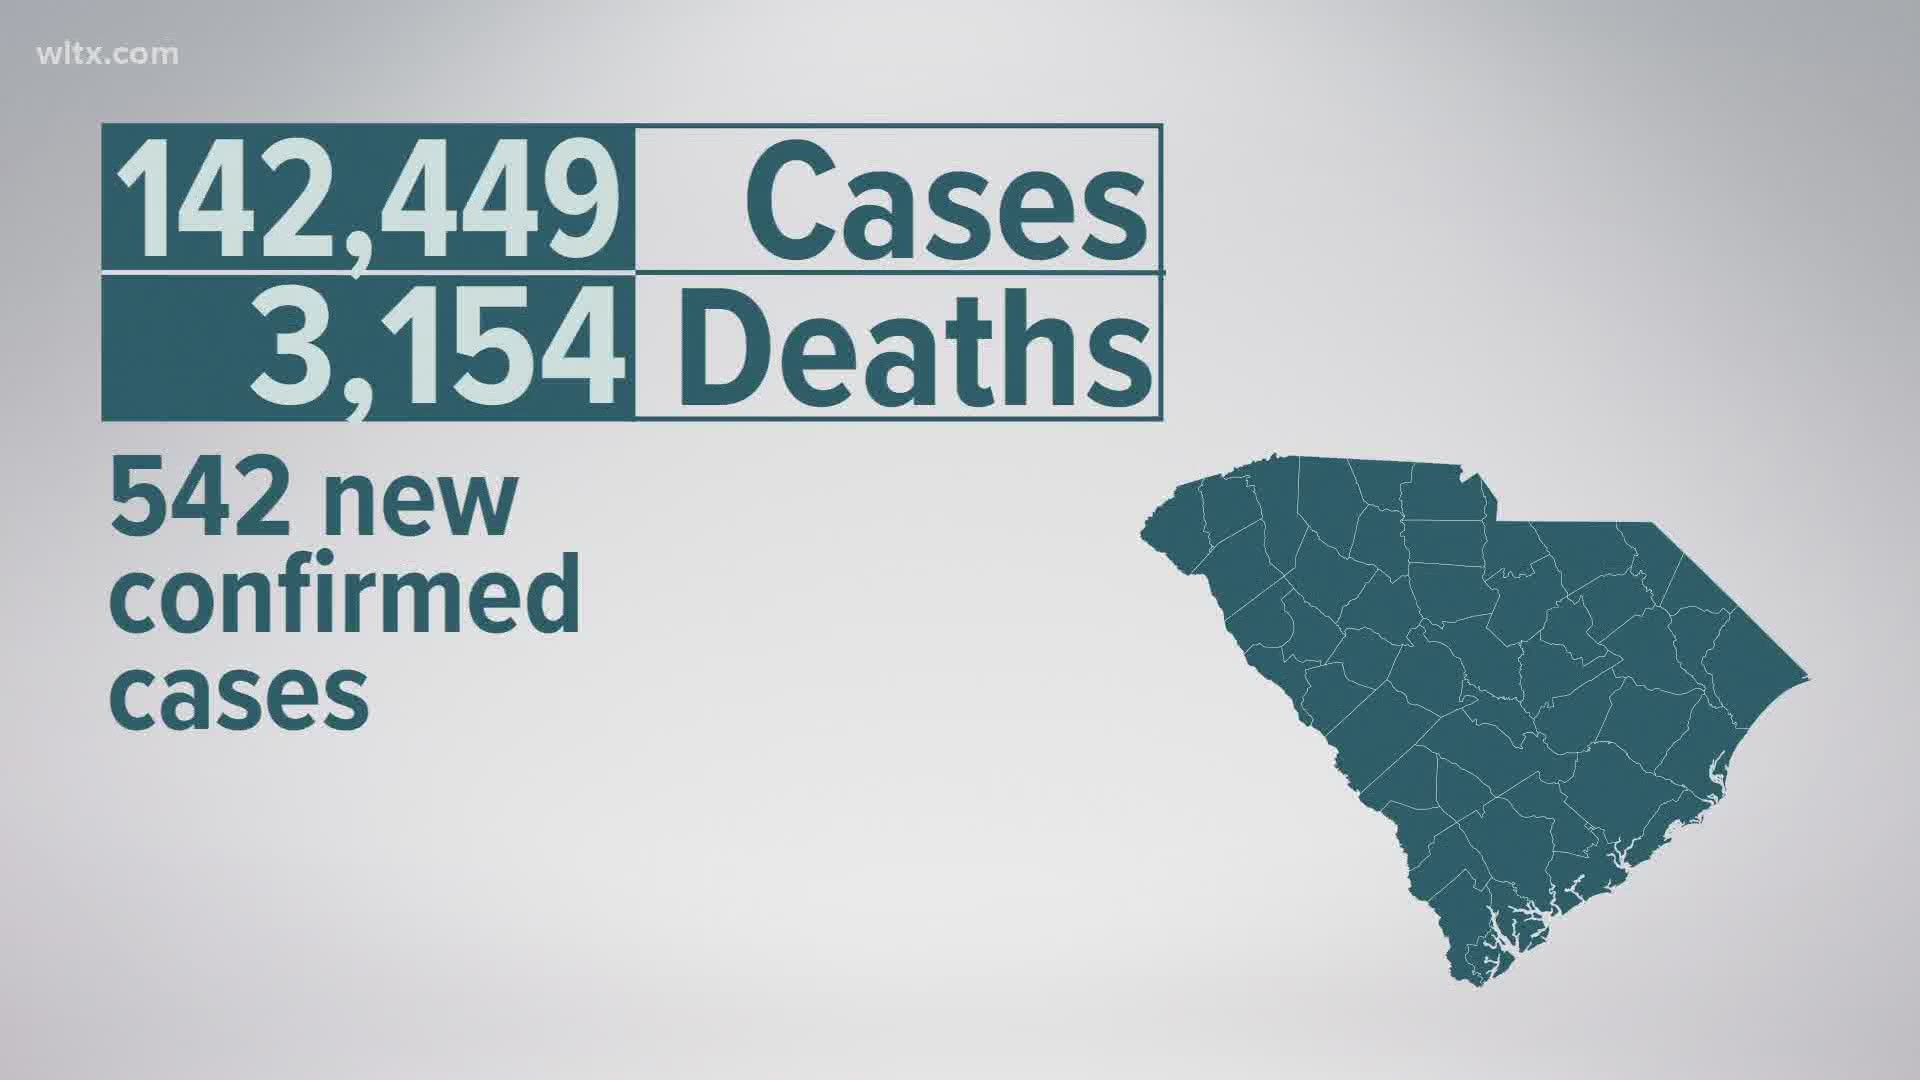 This brings the total number of confirmed cases to 142,449, probable cases to 4,006, confirmed deaths to 3,154, and 183 probable deaths.